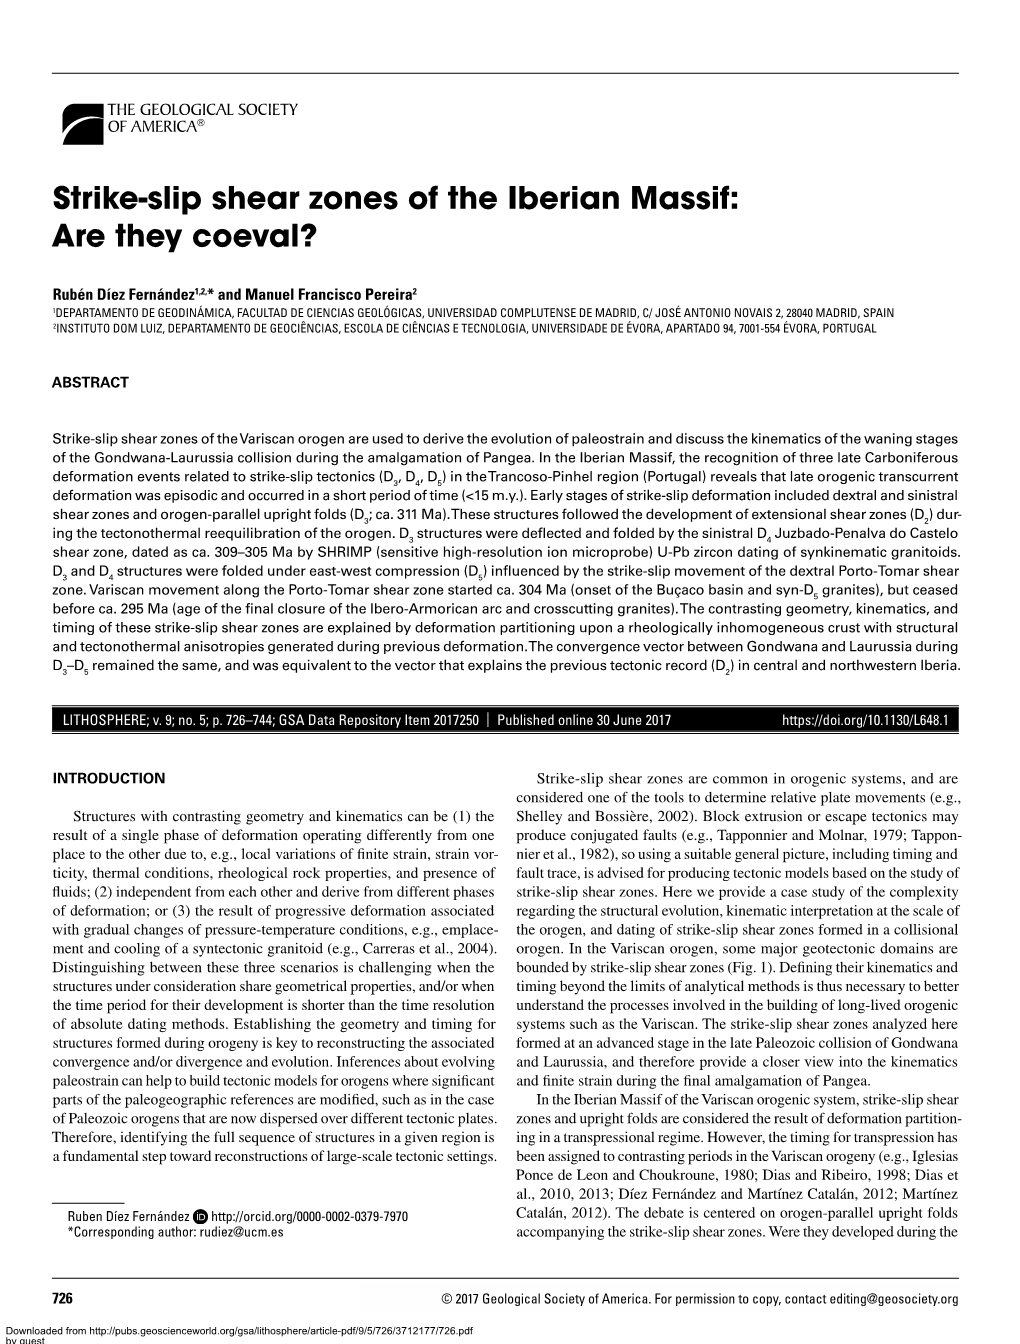 Strike-Slip Shear Zones of the Iberian Massif: Are They Coeval?